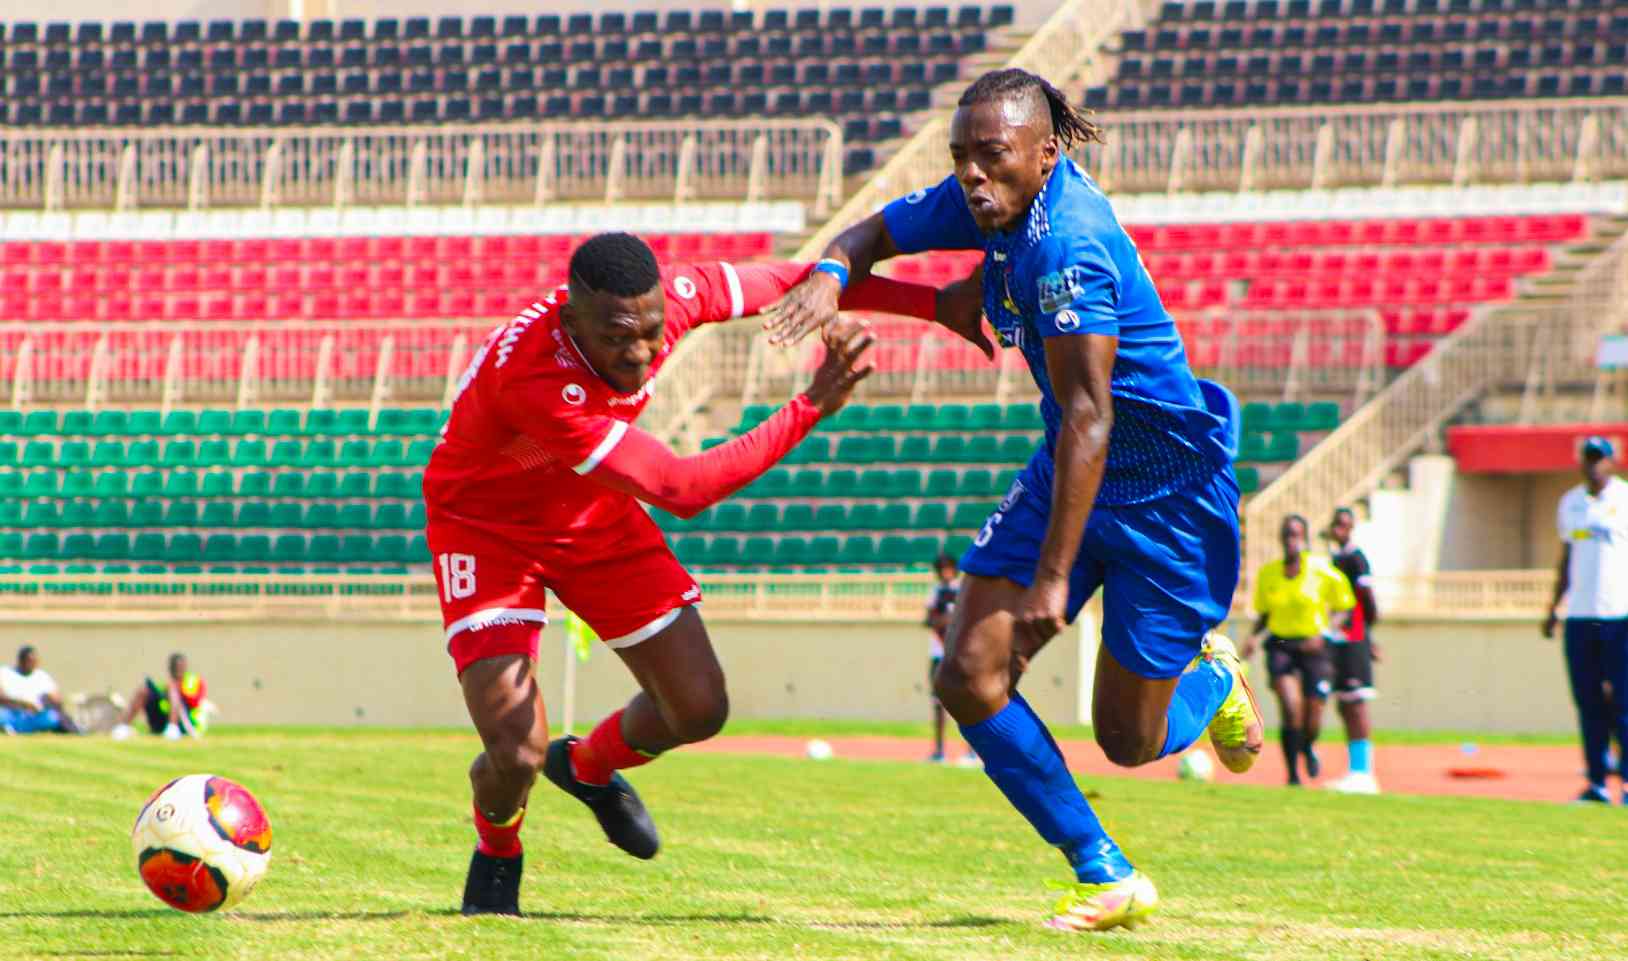 Kenya Police and Ulinzi Stars ‘Disciplined Forces Derby’ ends in draw again